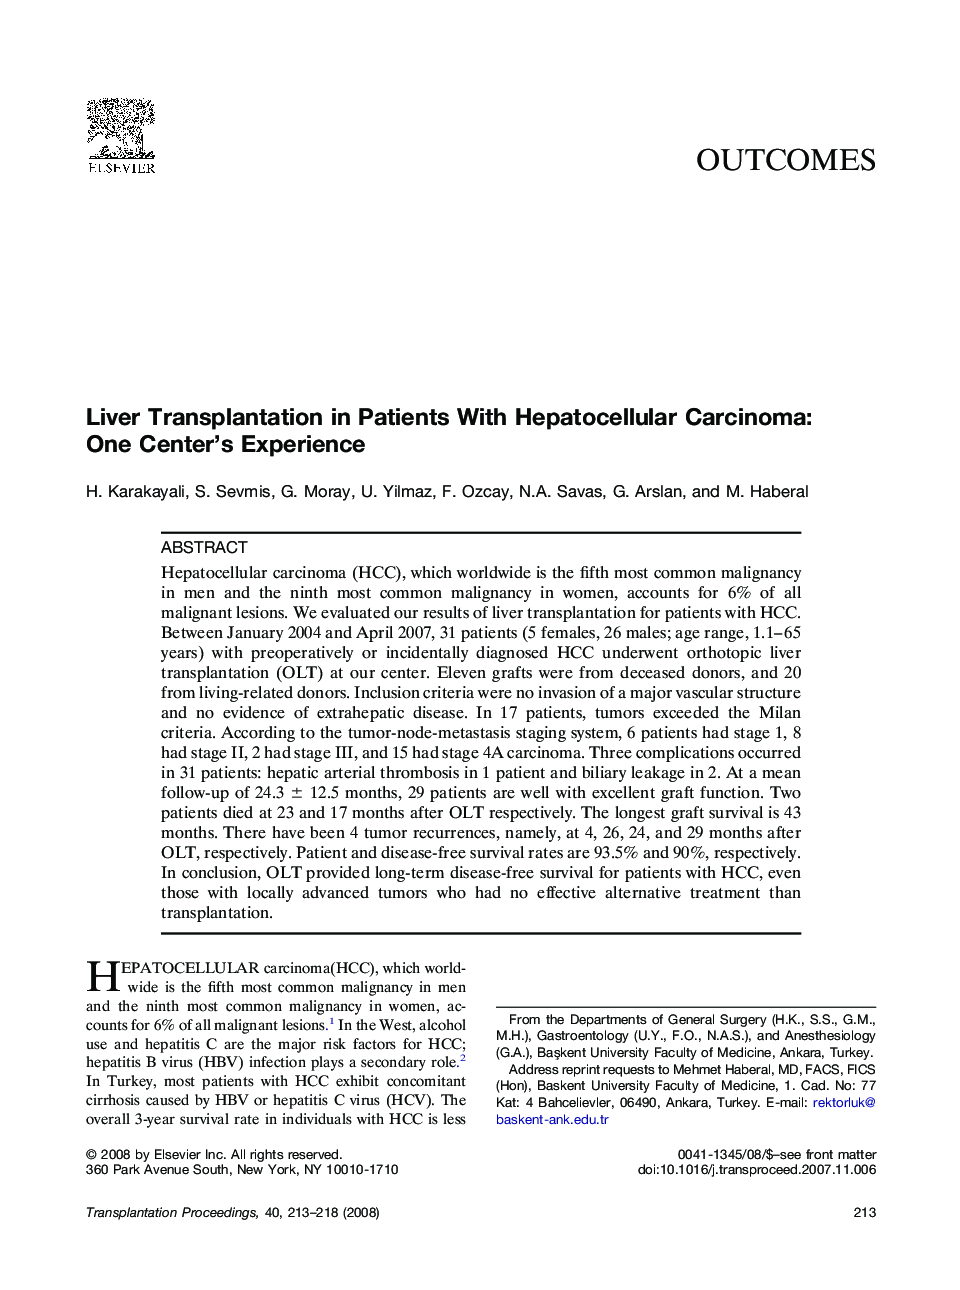 Liver Transplantation in Patients With Hepatocellular Carcinoma: One Center’s Experience